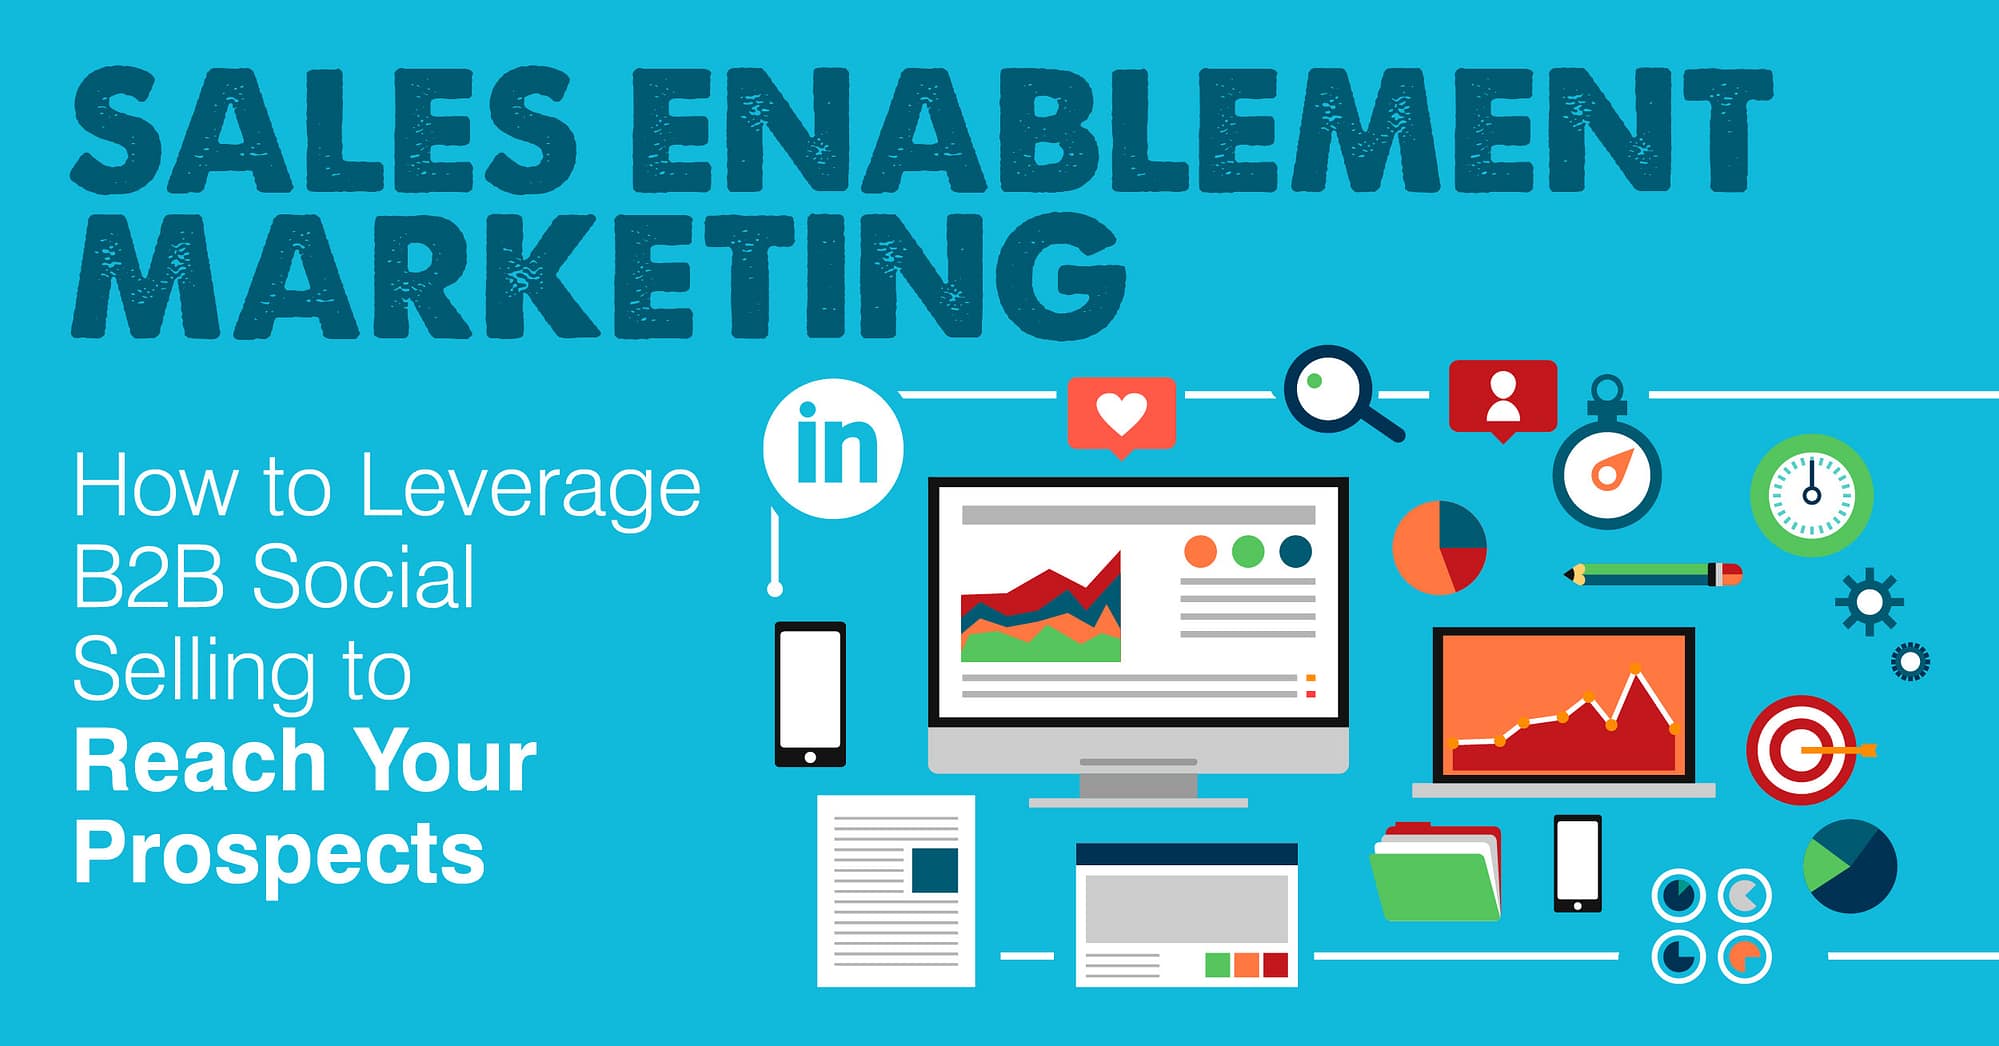 sales enablement marketing - how to leverage b2b social selling to reach your prospects